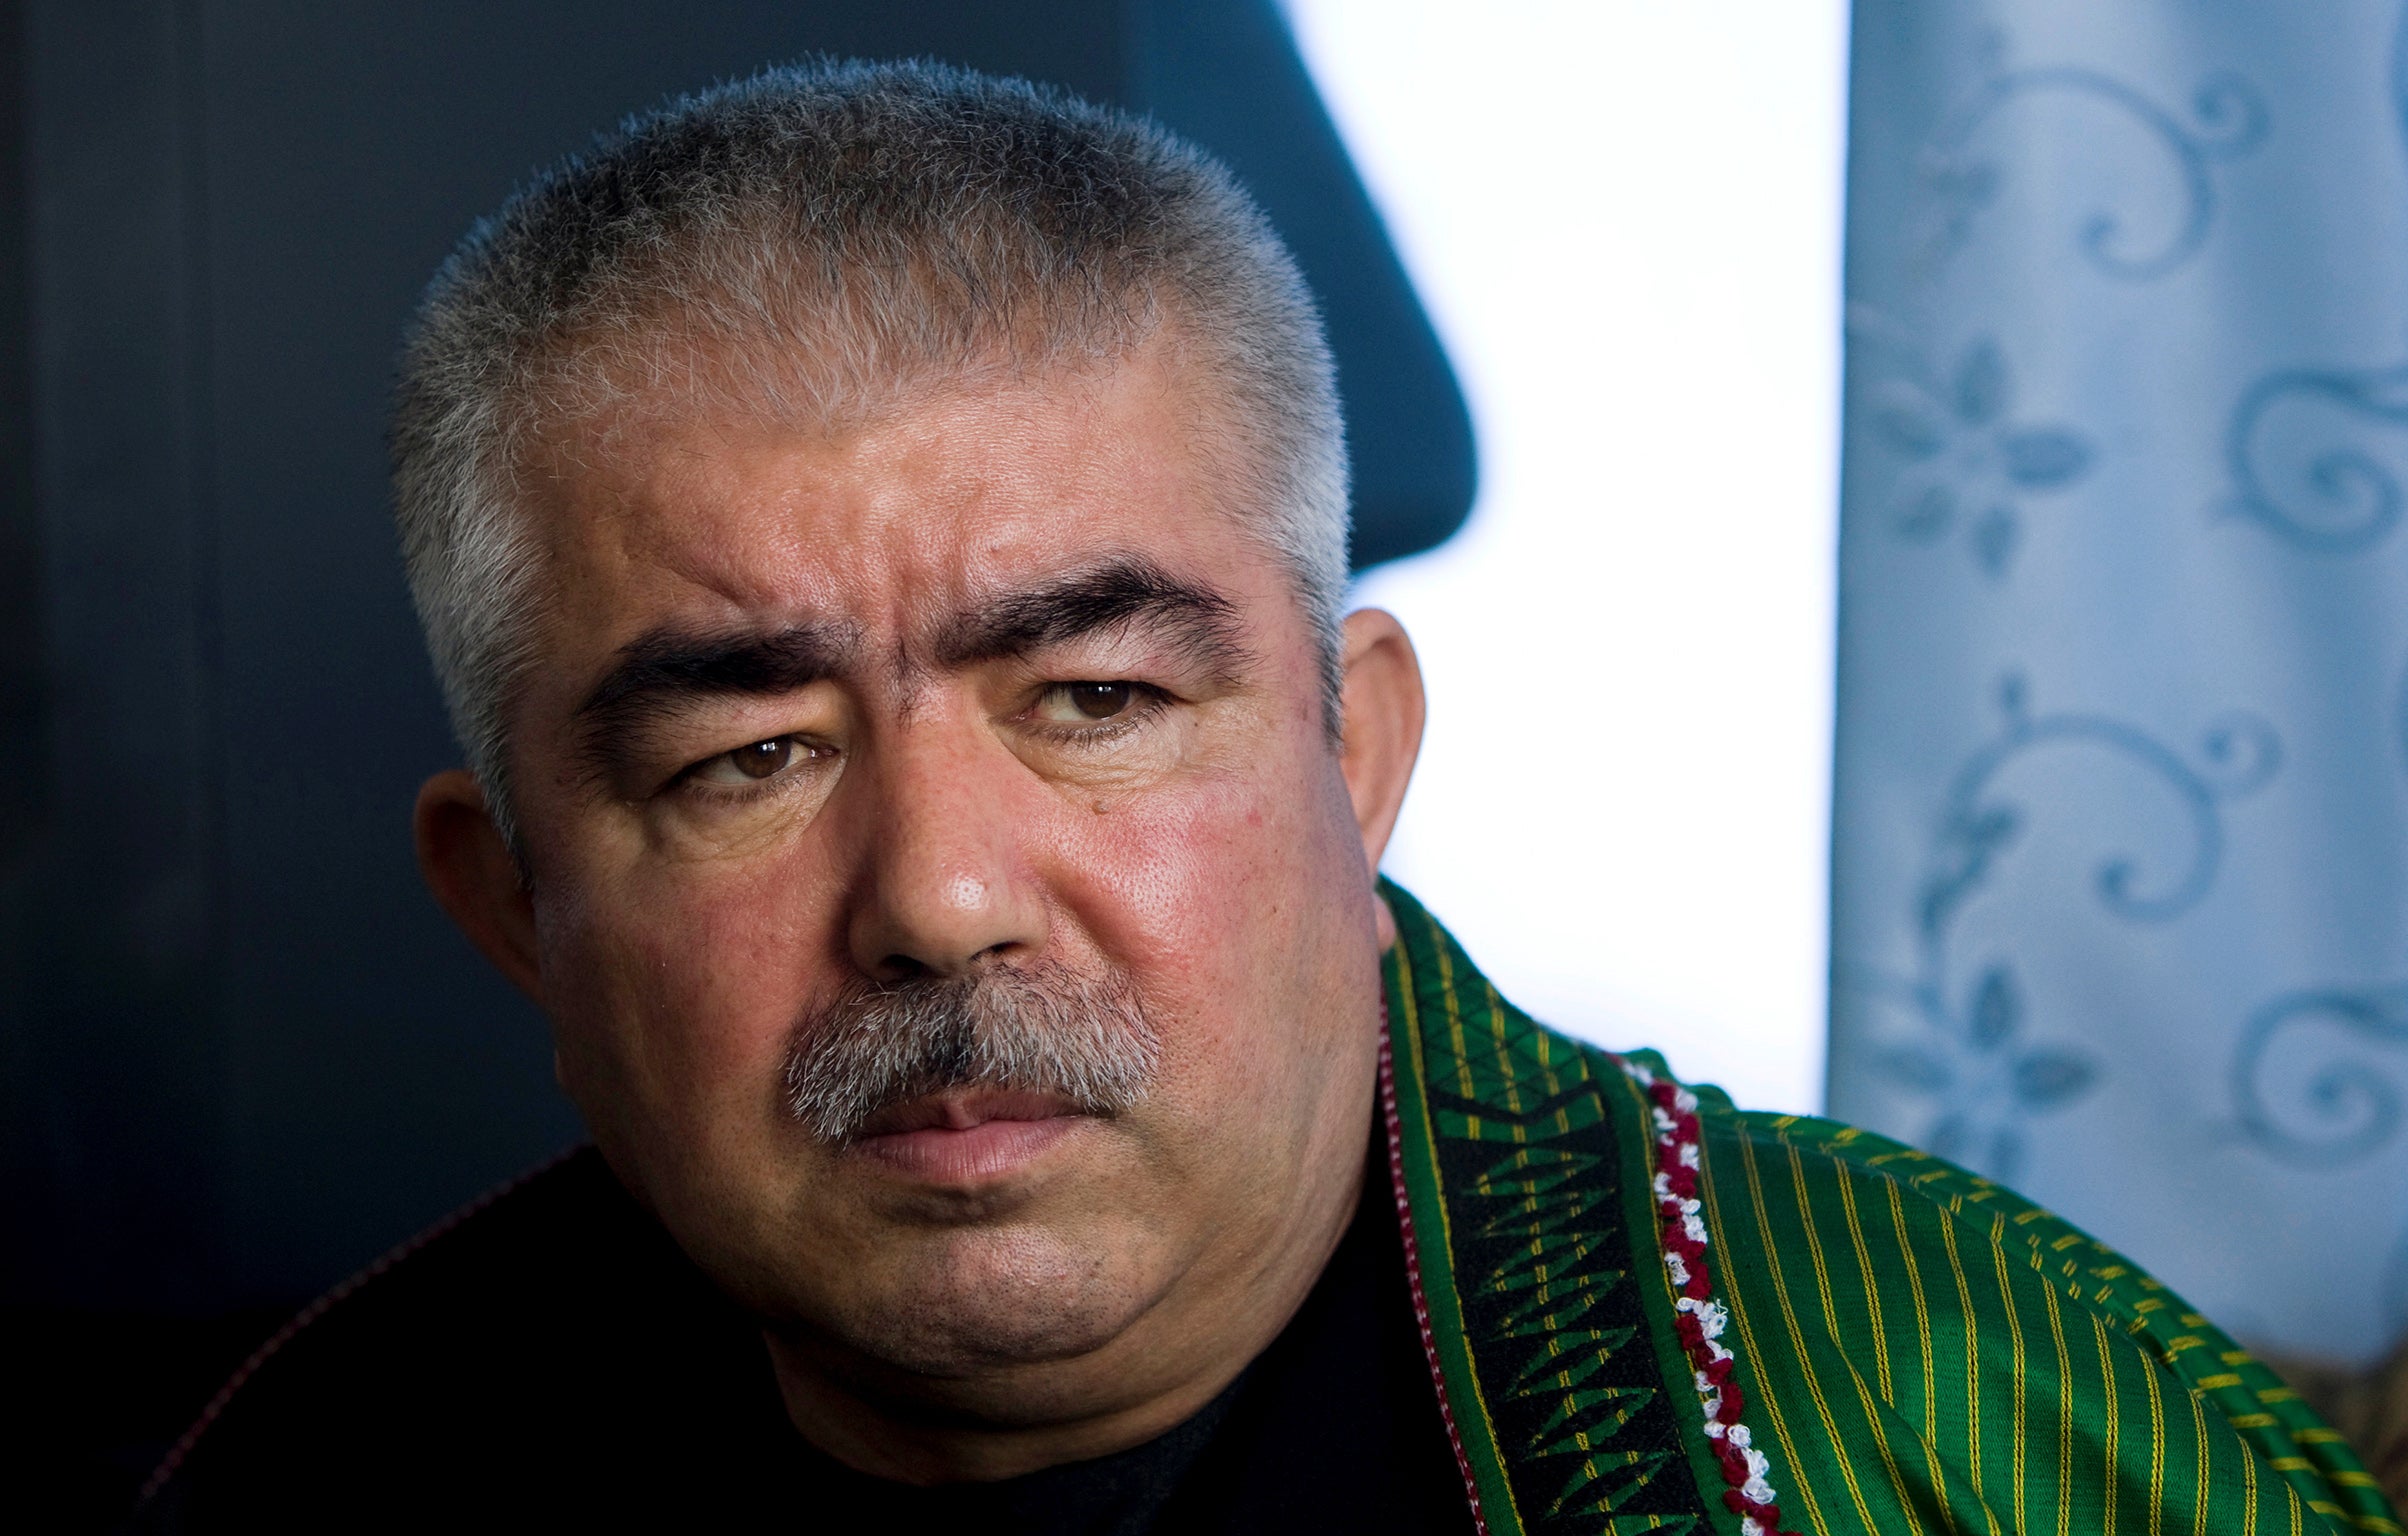 Afghanistan's vice president Abdul Rashid Dostum is one of the three members of the new coalition